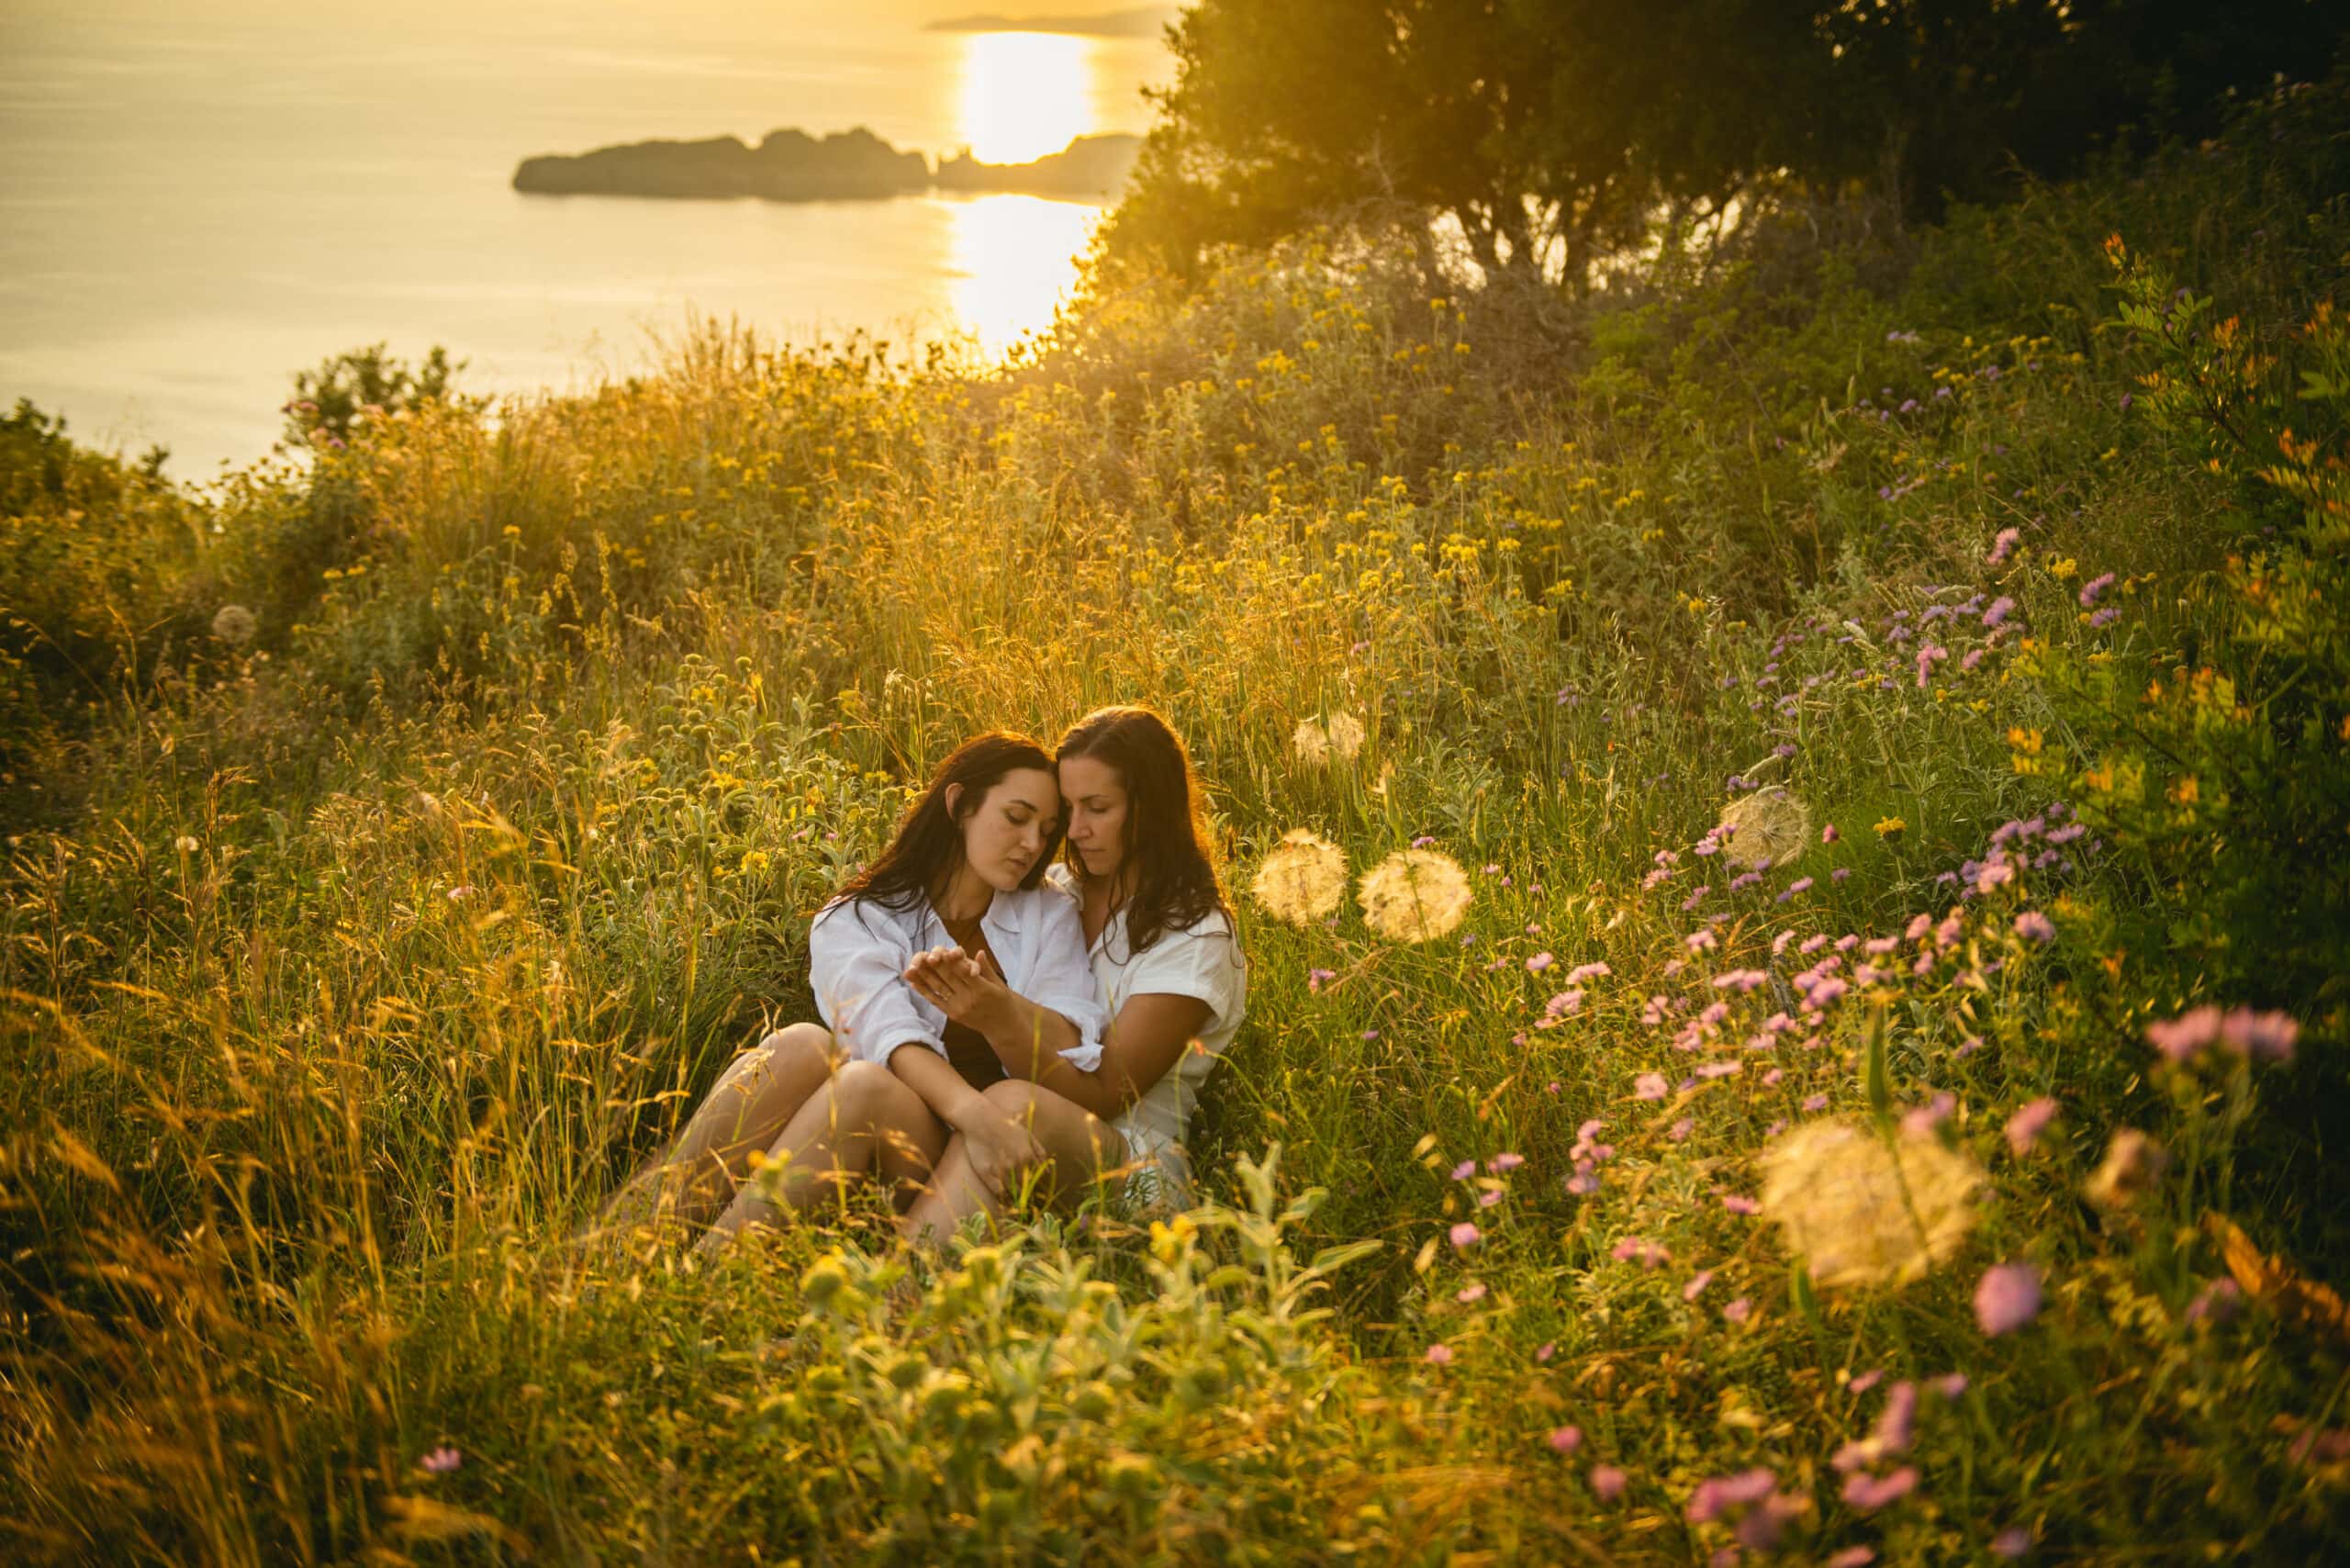 Brides enjoying a serene moment, seated amidst the lush grass during their Corfu elopement.